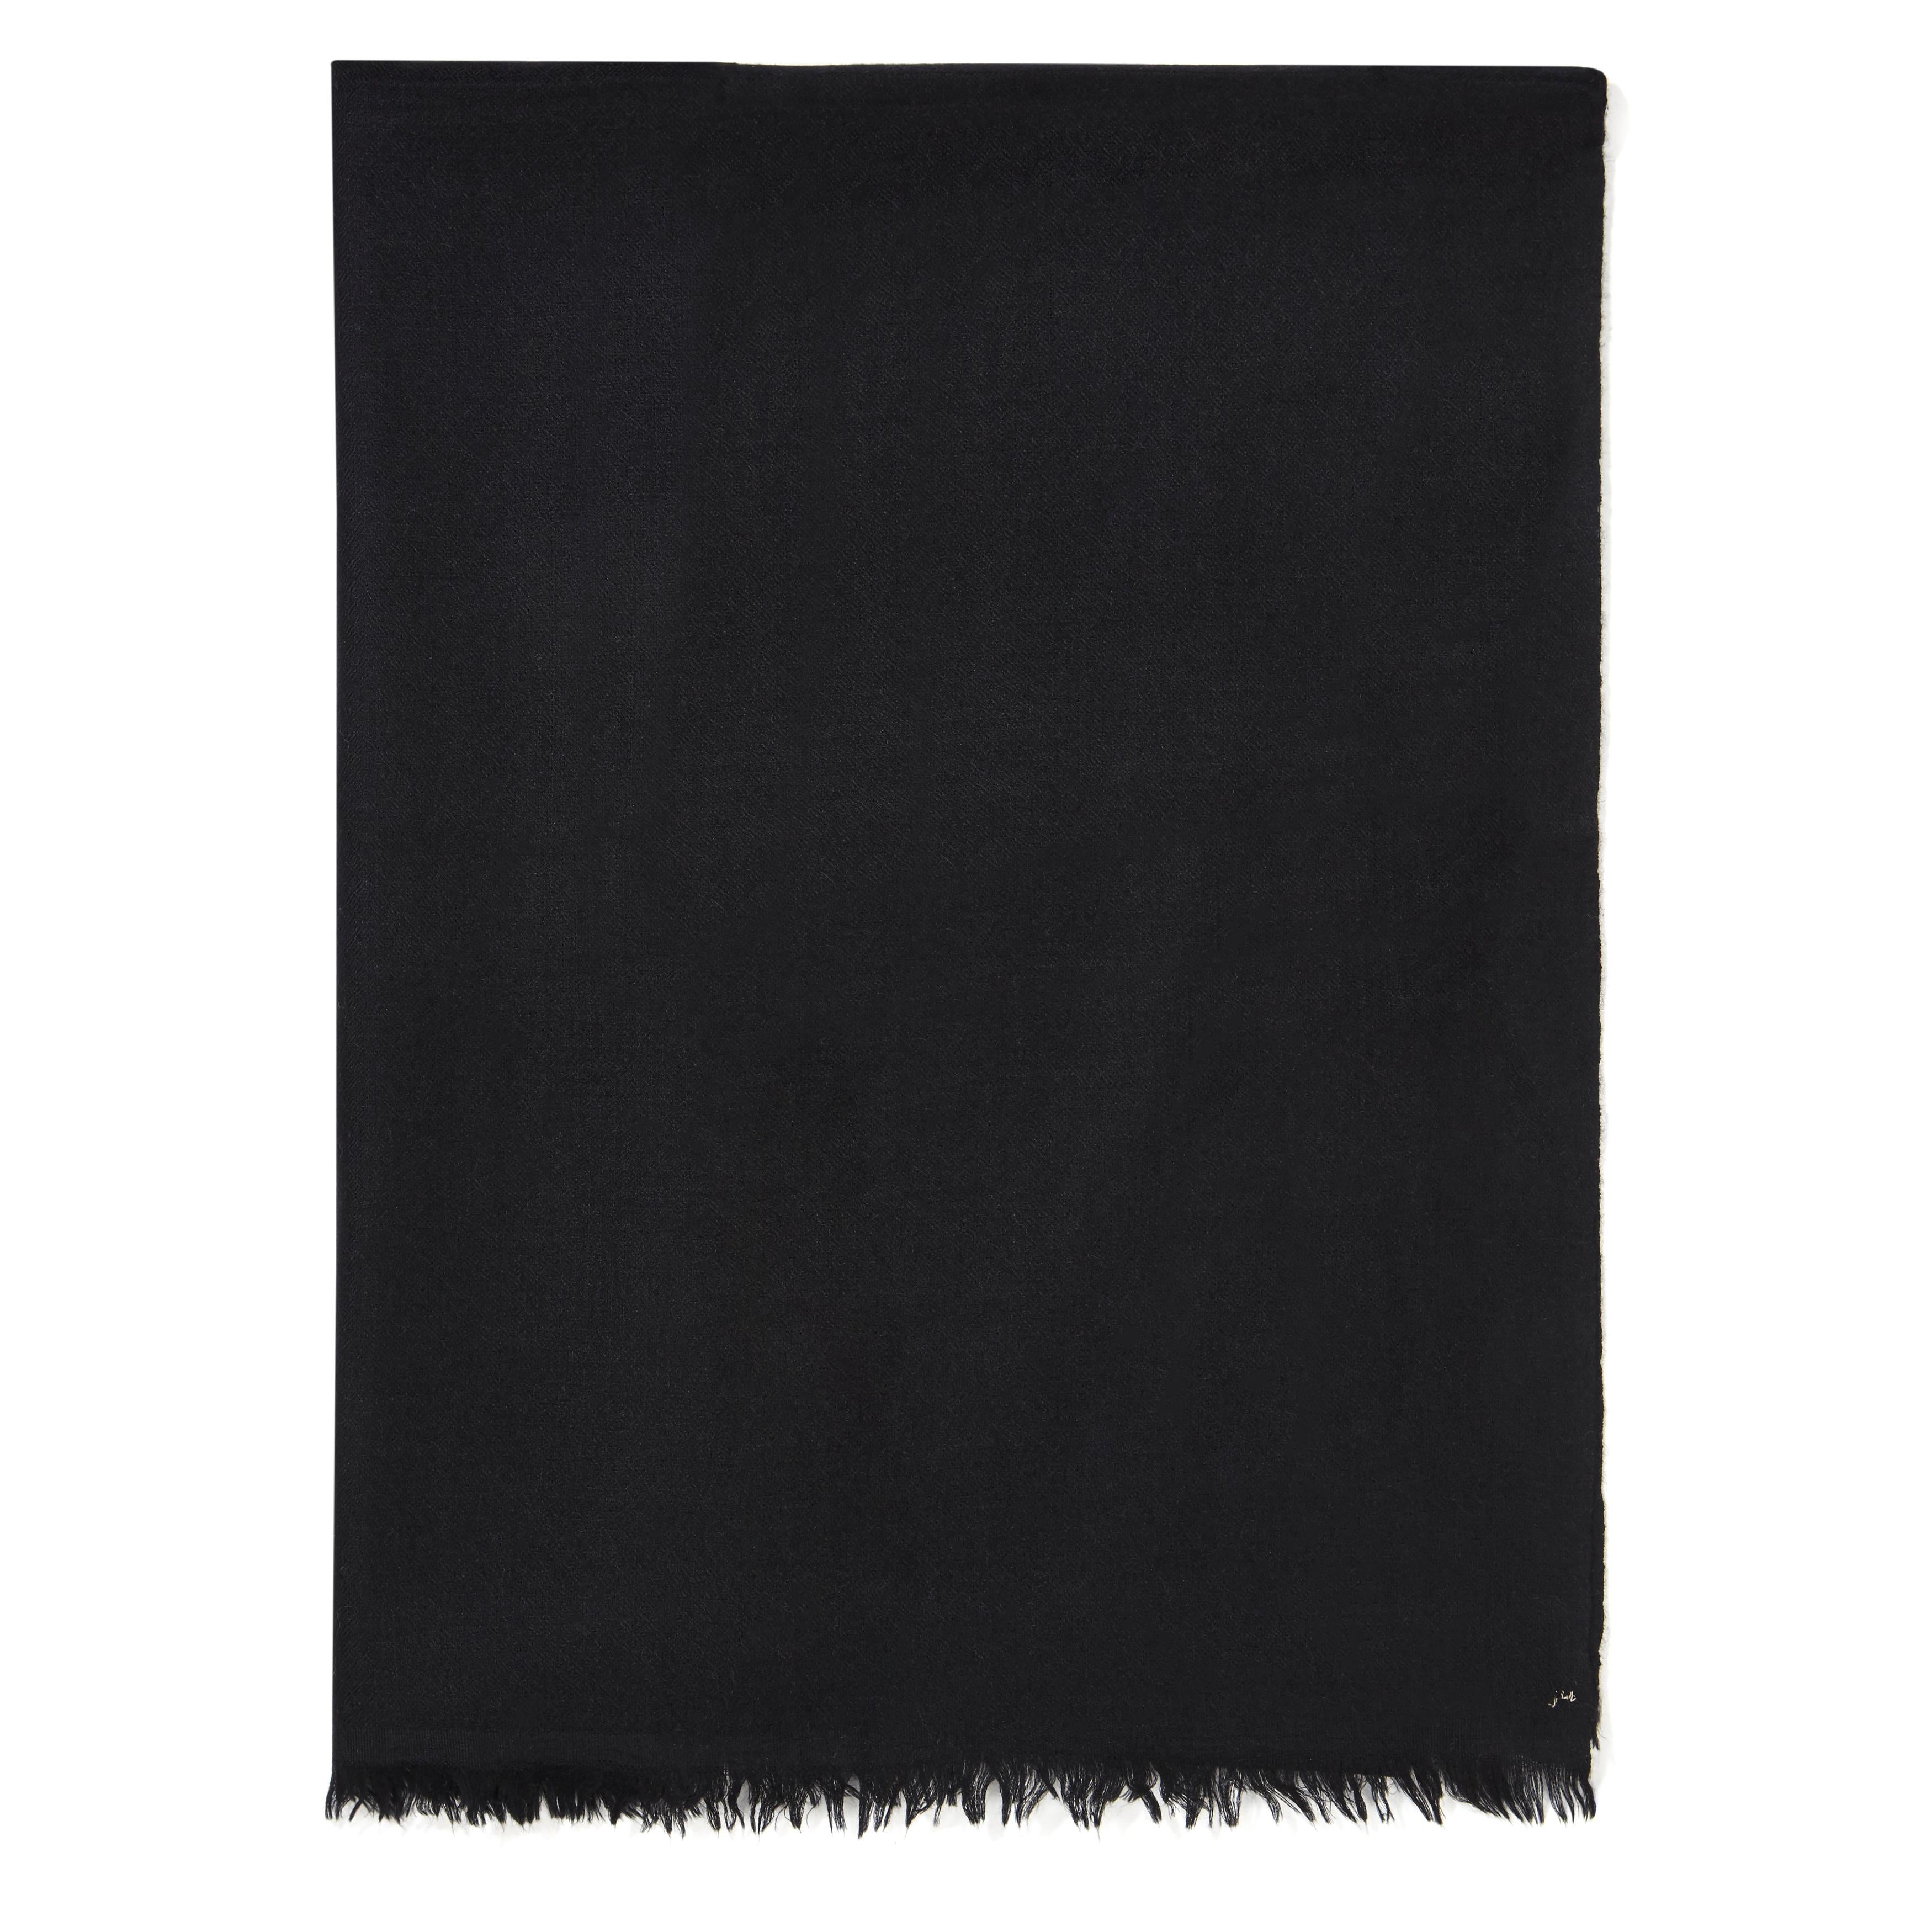 The perfect Christmas gift for someone special - this shawl is unique and handmade. 
Verheyen London’s shawl is spun from the finest handwoven cashmere from Kashmir.  Each one has been signed by hand by the person who made it. 
Its warmth envelopes